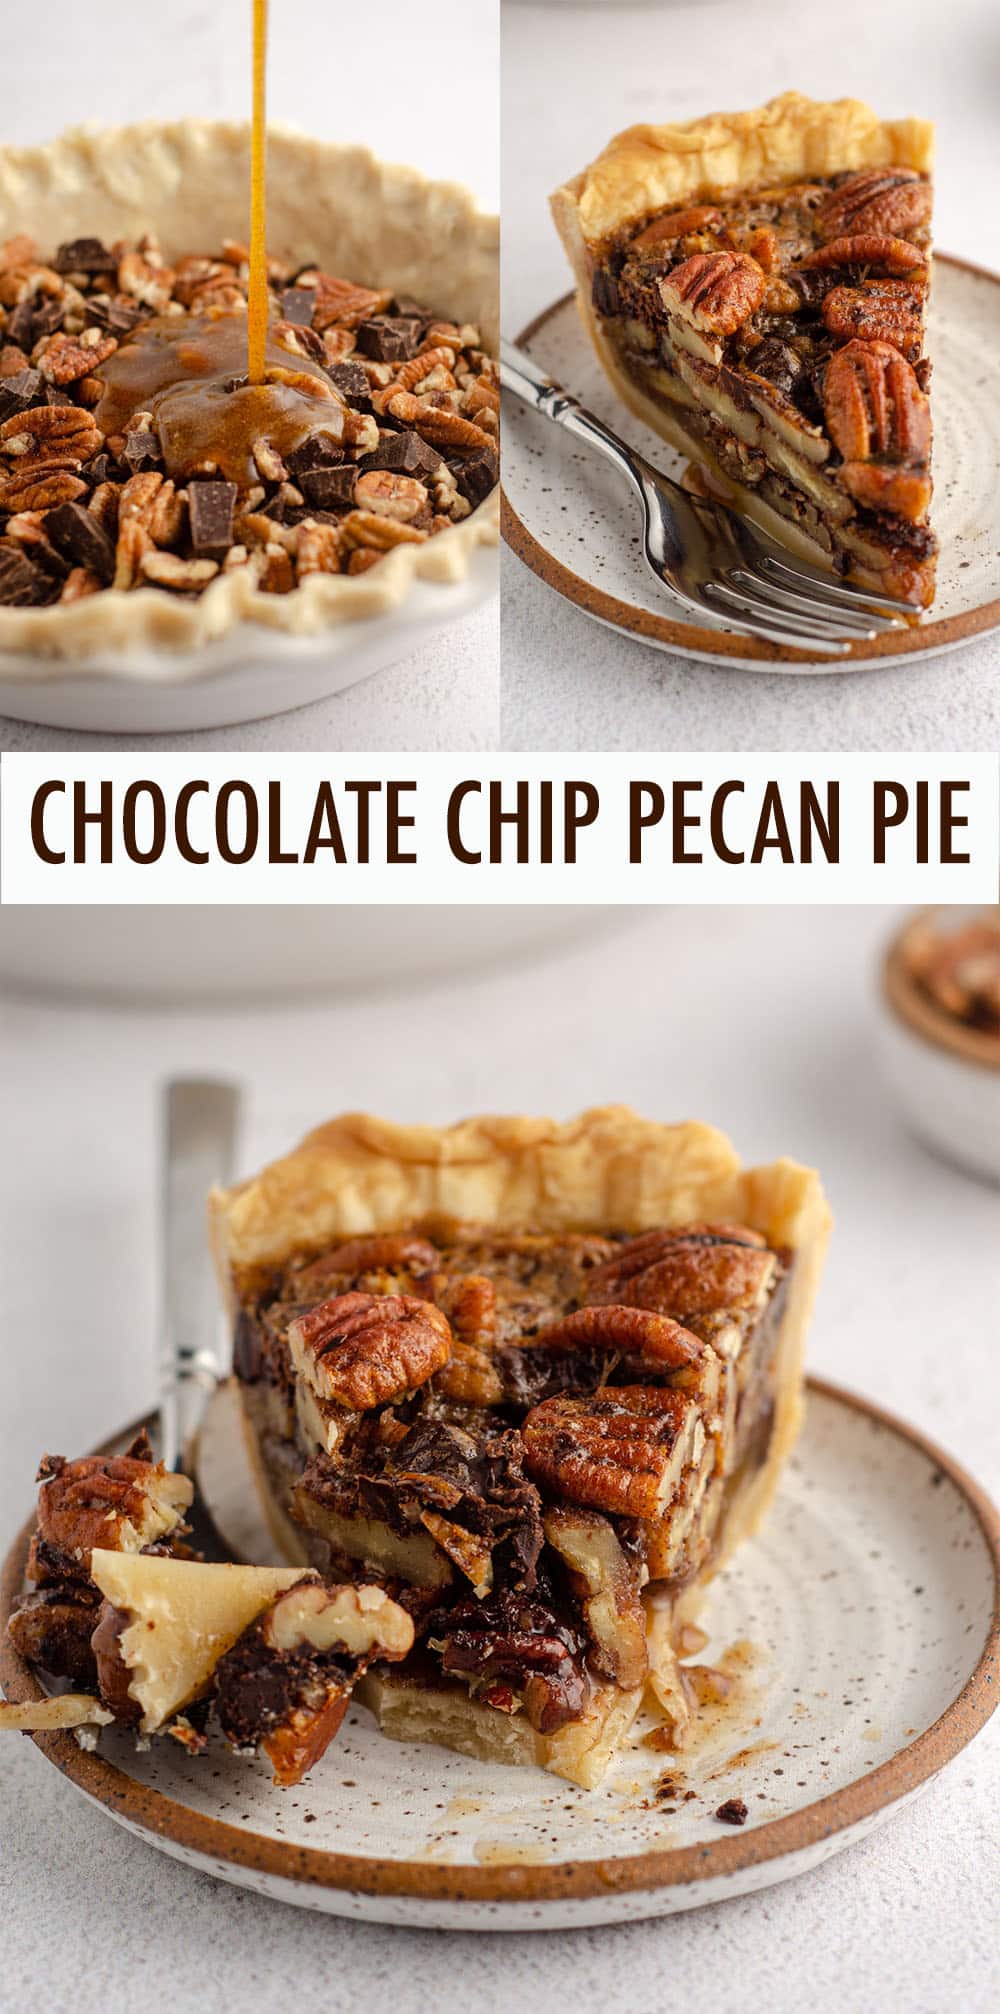 Traditional pecan pie gets a chocolate overhaul with chocolate chips and/or chopped chocolate. This sweet and salty combo is perfect with a scoop of ice cream or a dollop of whipped cream. via @frshaprilflours